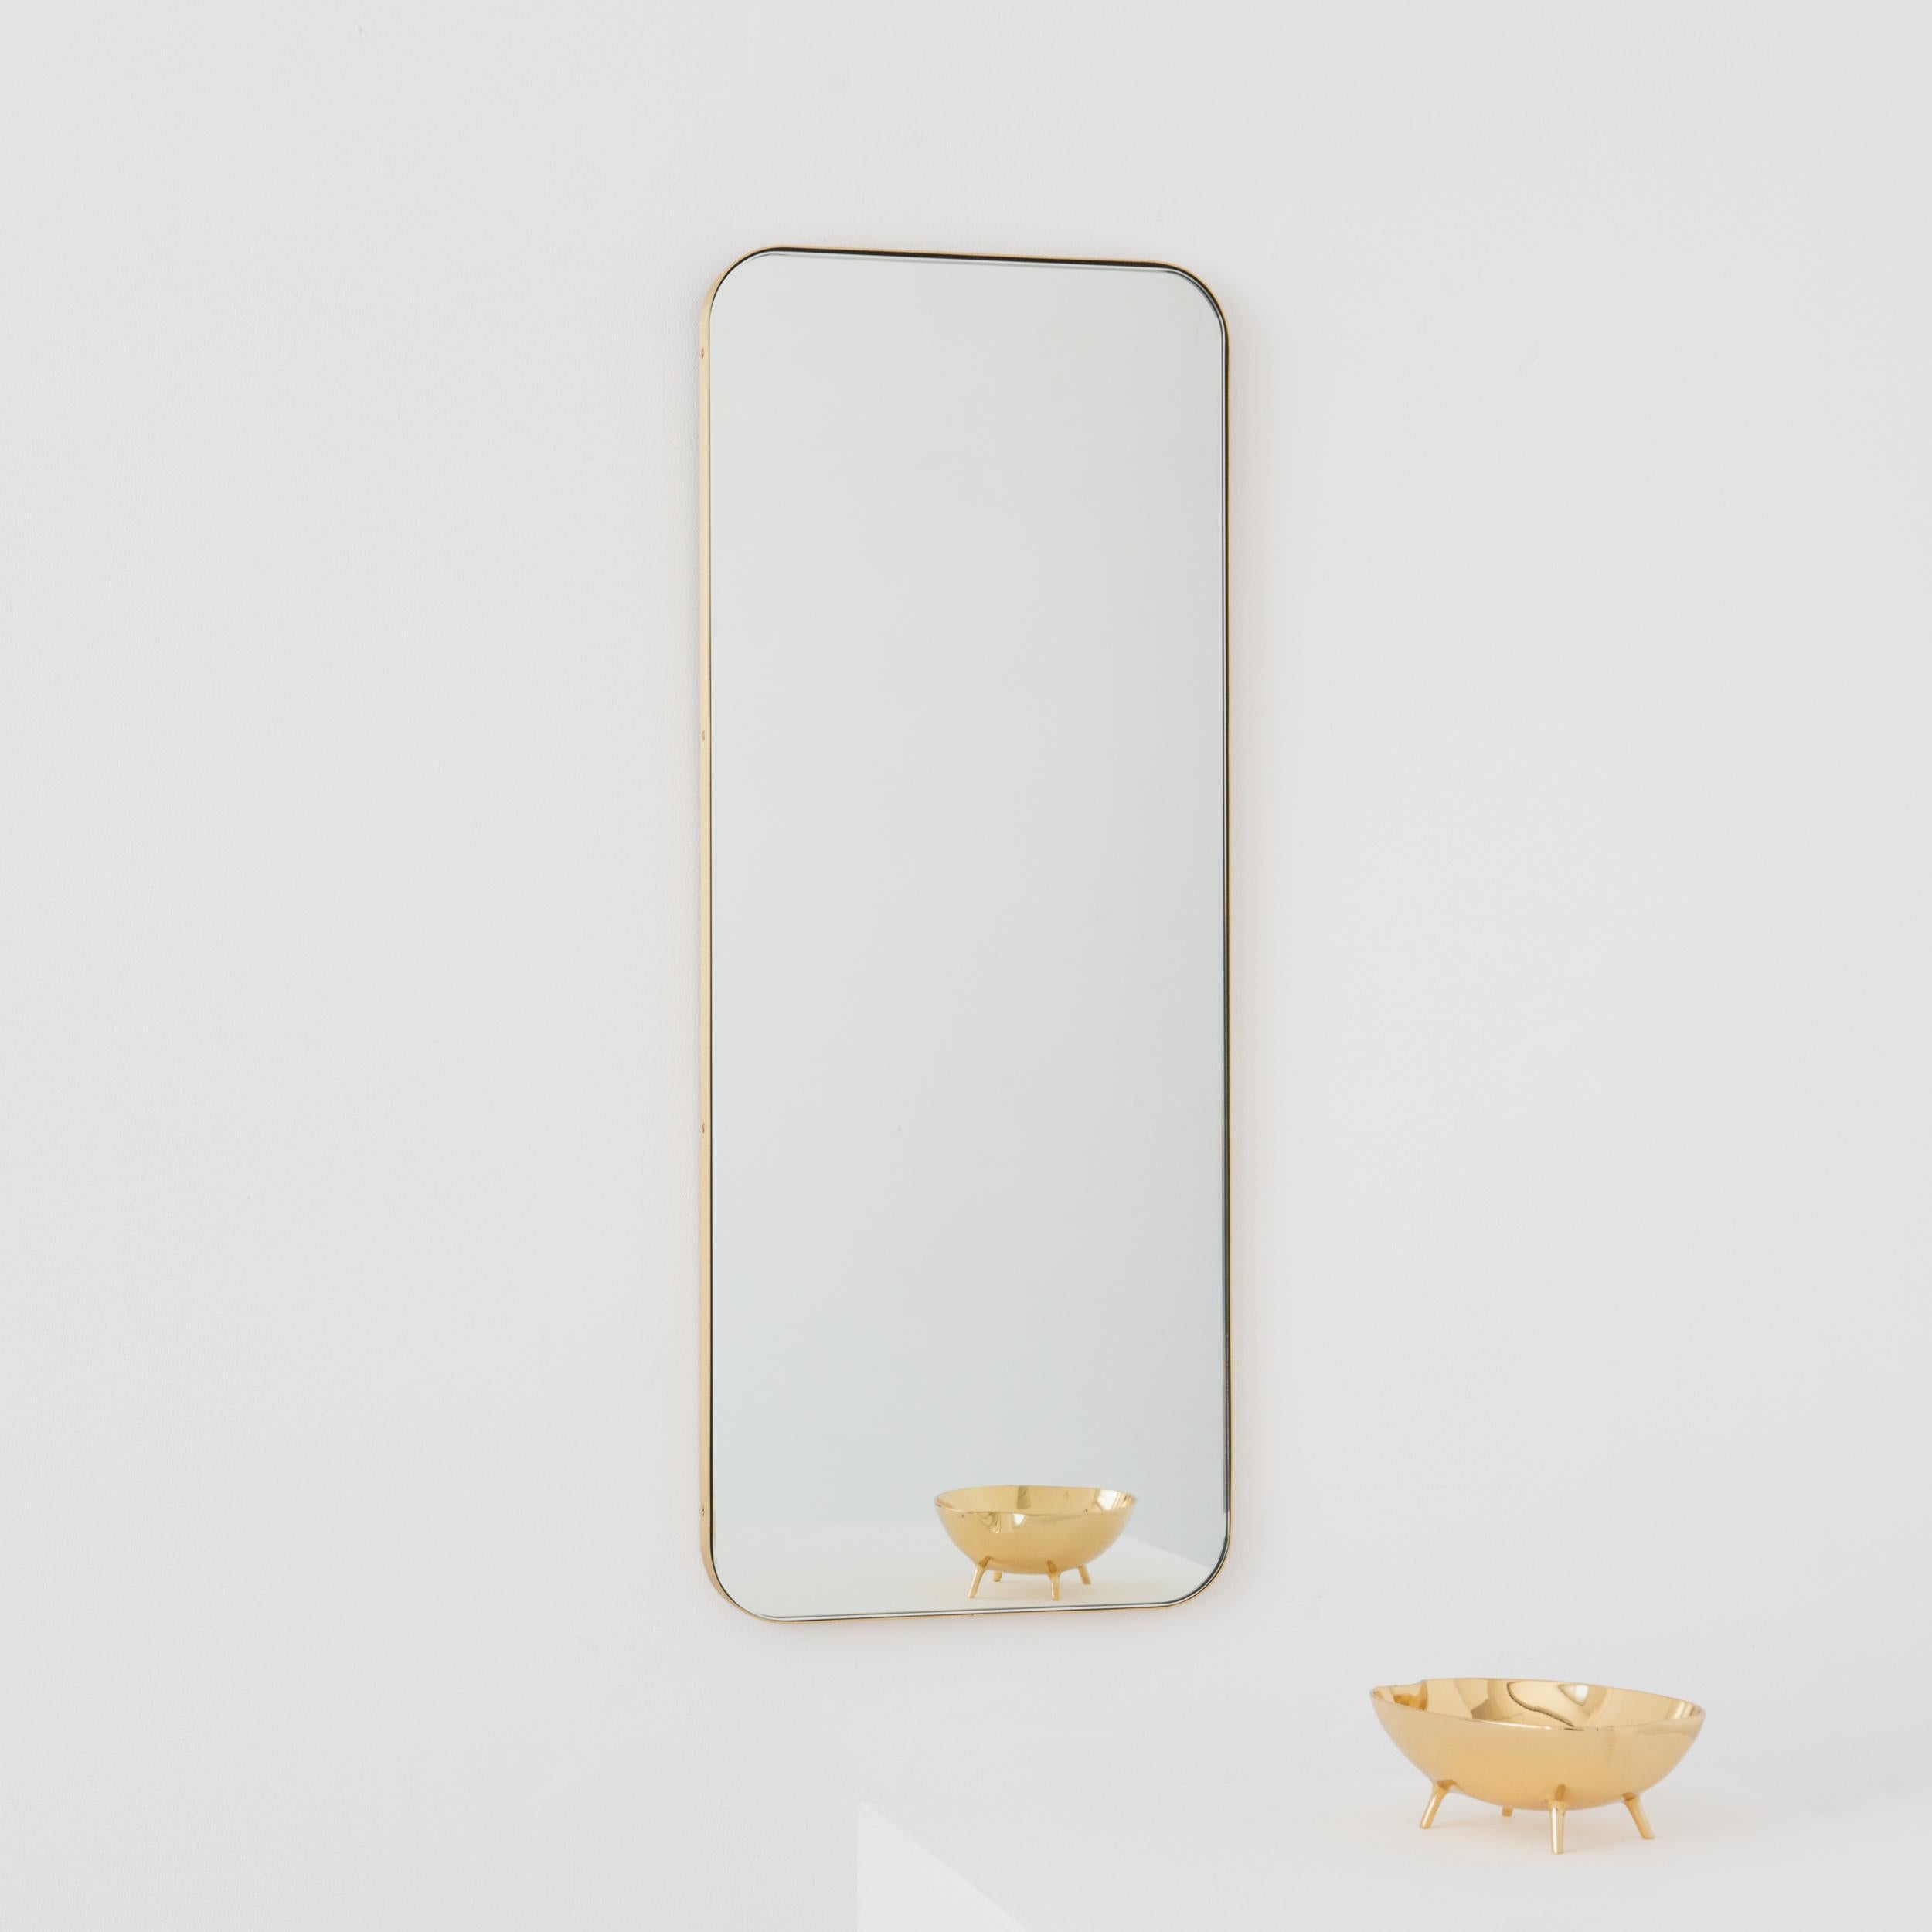 Modern rectangular mirror with an elegant solid brushed brass frame. Part of the charming Quadris™ collection, designed and handcrafted in London, UK. 

Medium, large and extra-large (37cm x 56cm, 46cm x 71cm and 48cm x 97cm) mirrors are fitted with